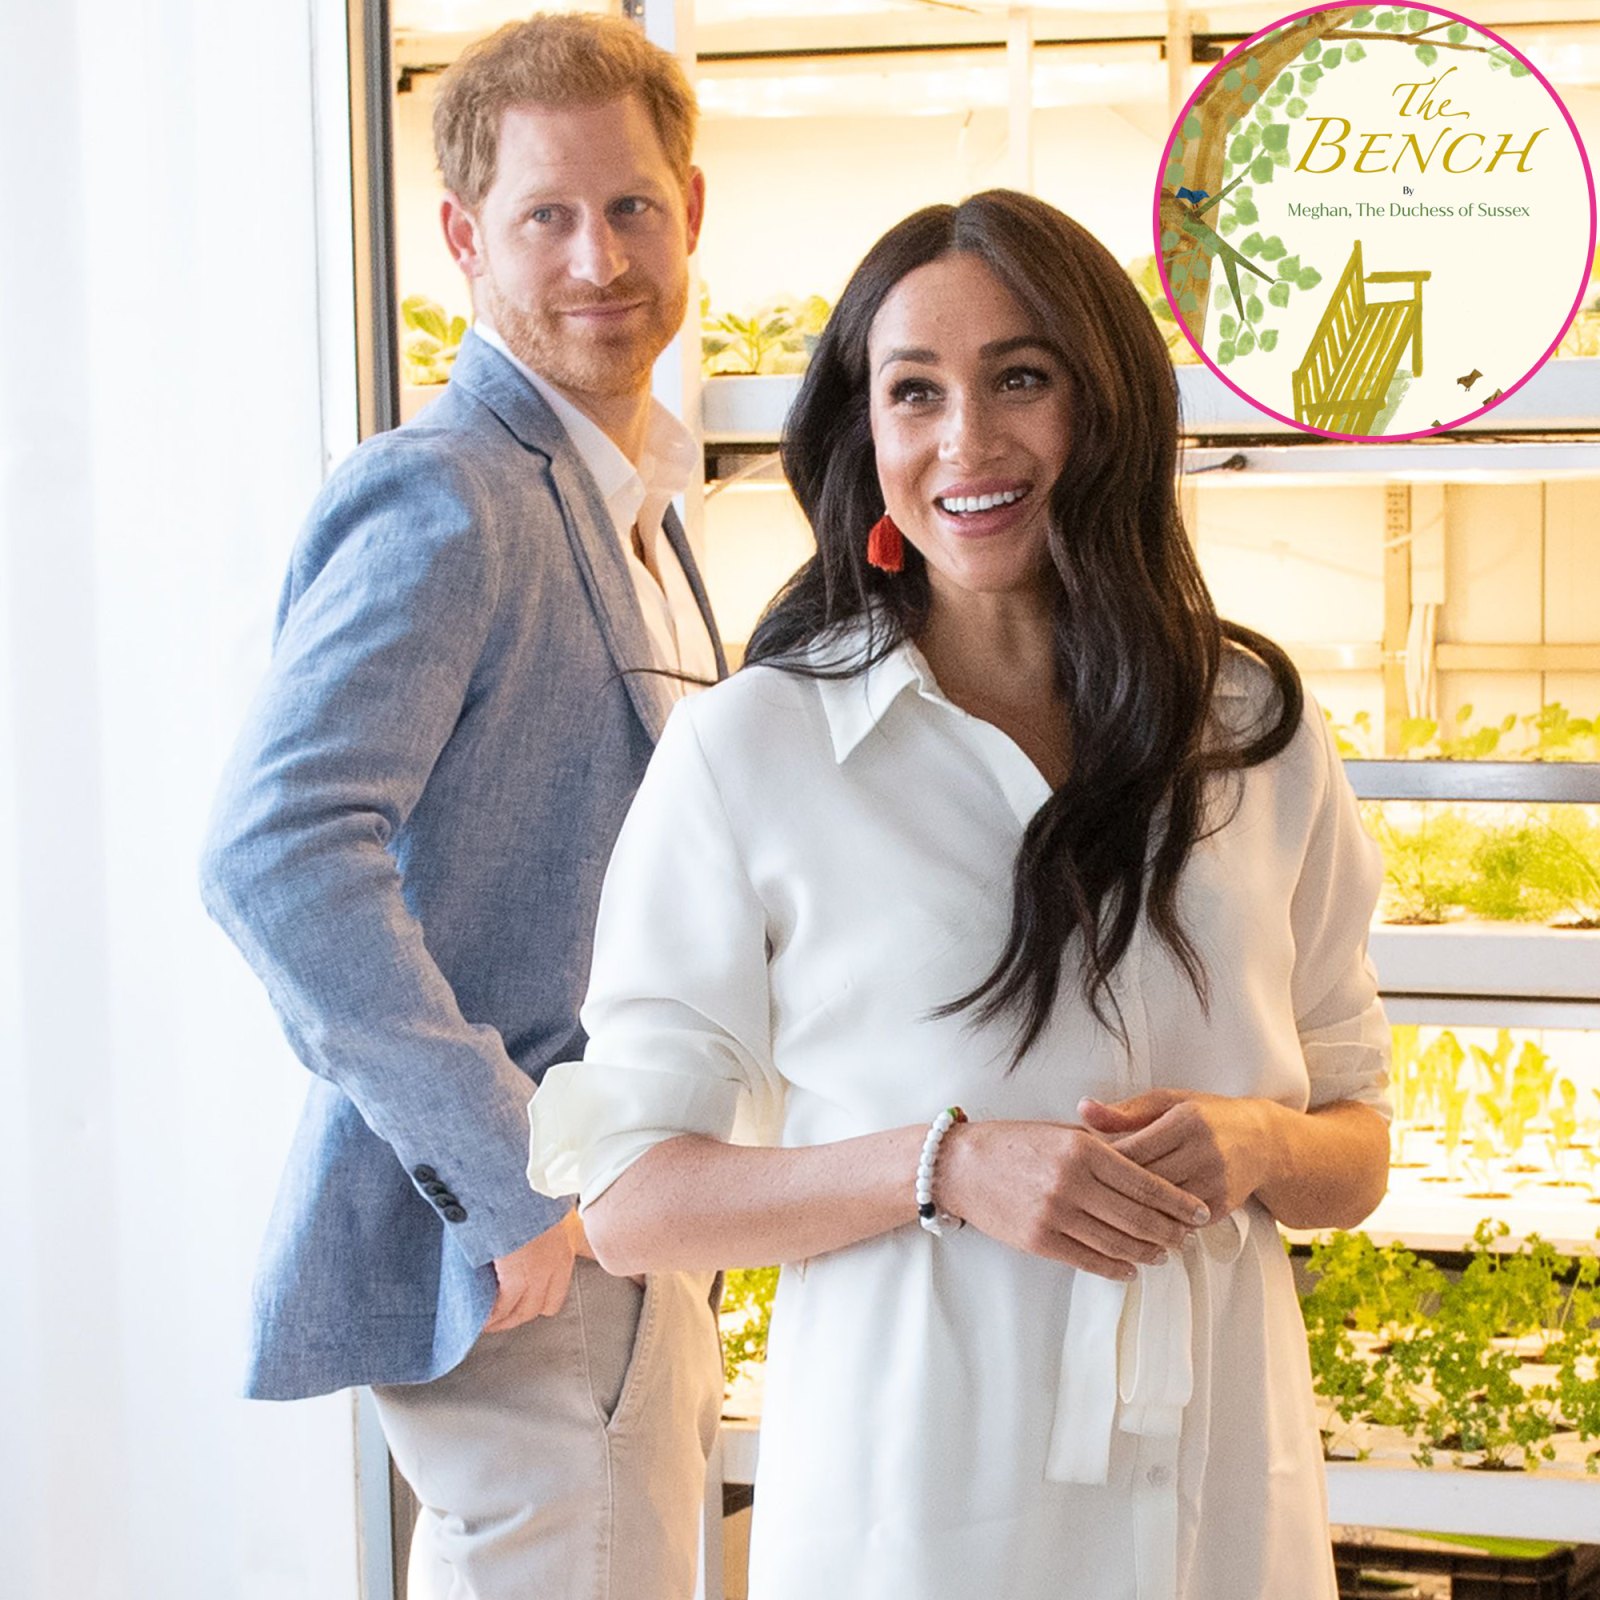 Meghan Markle Is Donating 2,000 Copies of ‘The Bench’ to Schools, Libraries